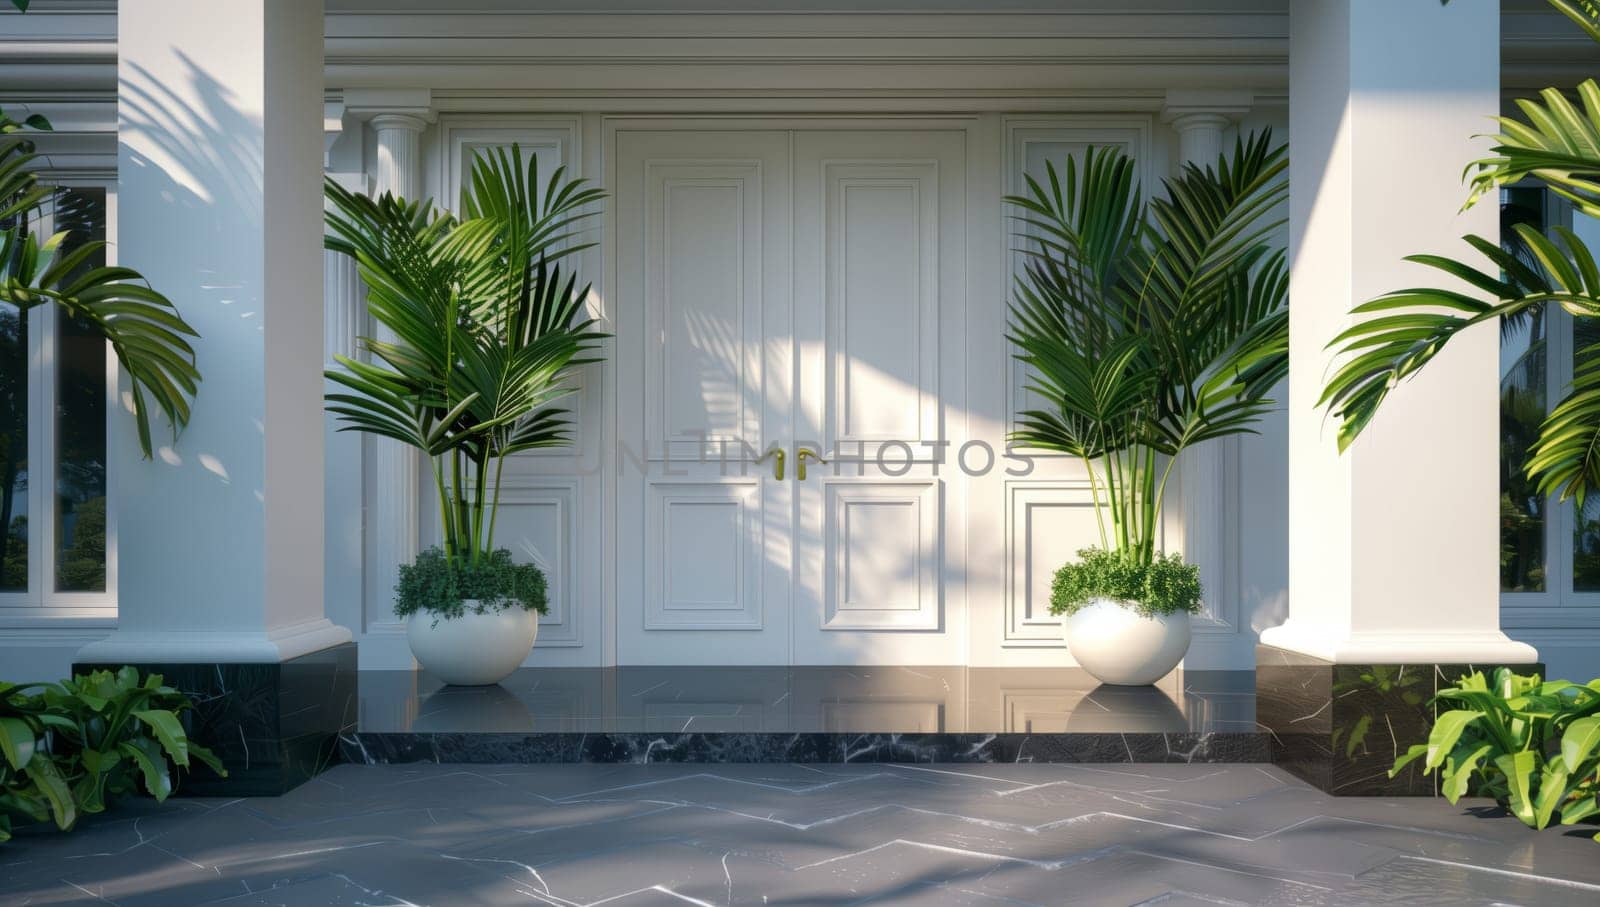 A white door stands in front of a building with palm trees surrounding it, creating a tropical oasis. The property features lush green grass and asphalt flooring